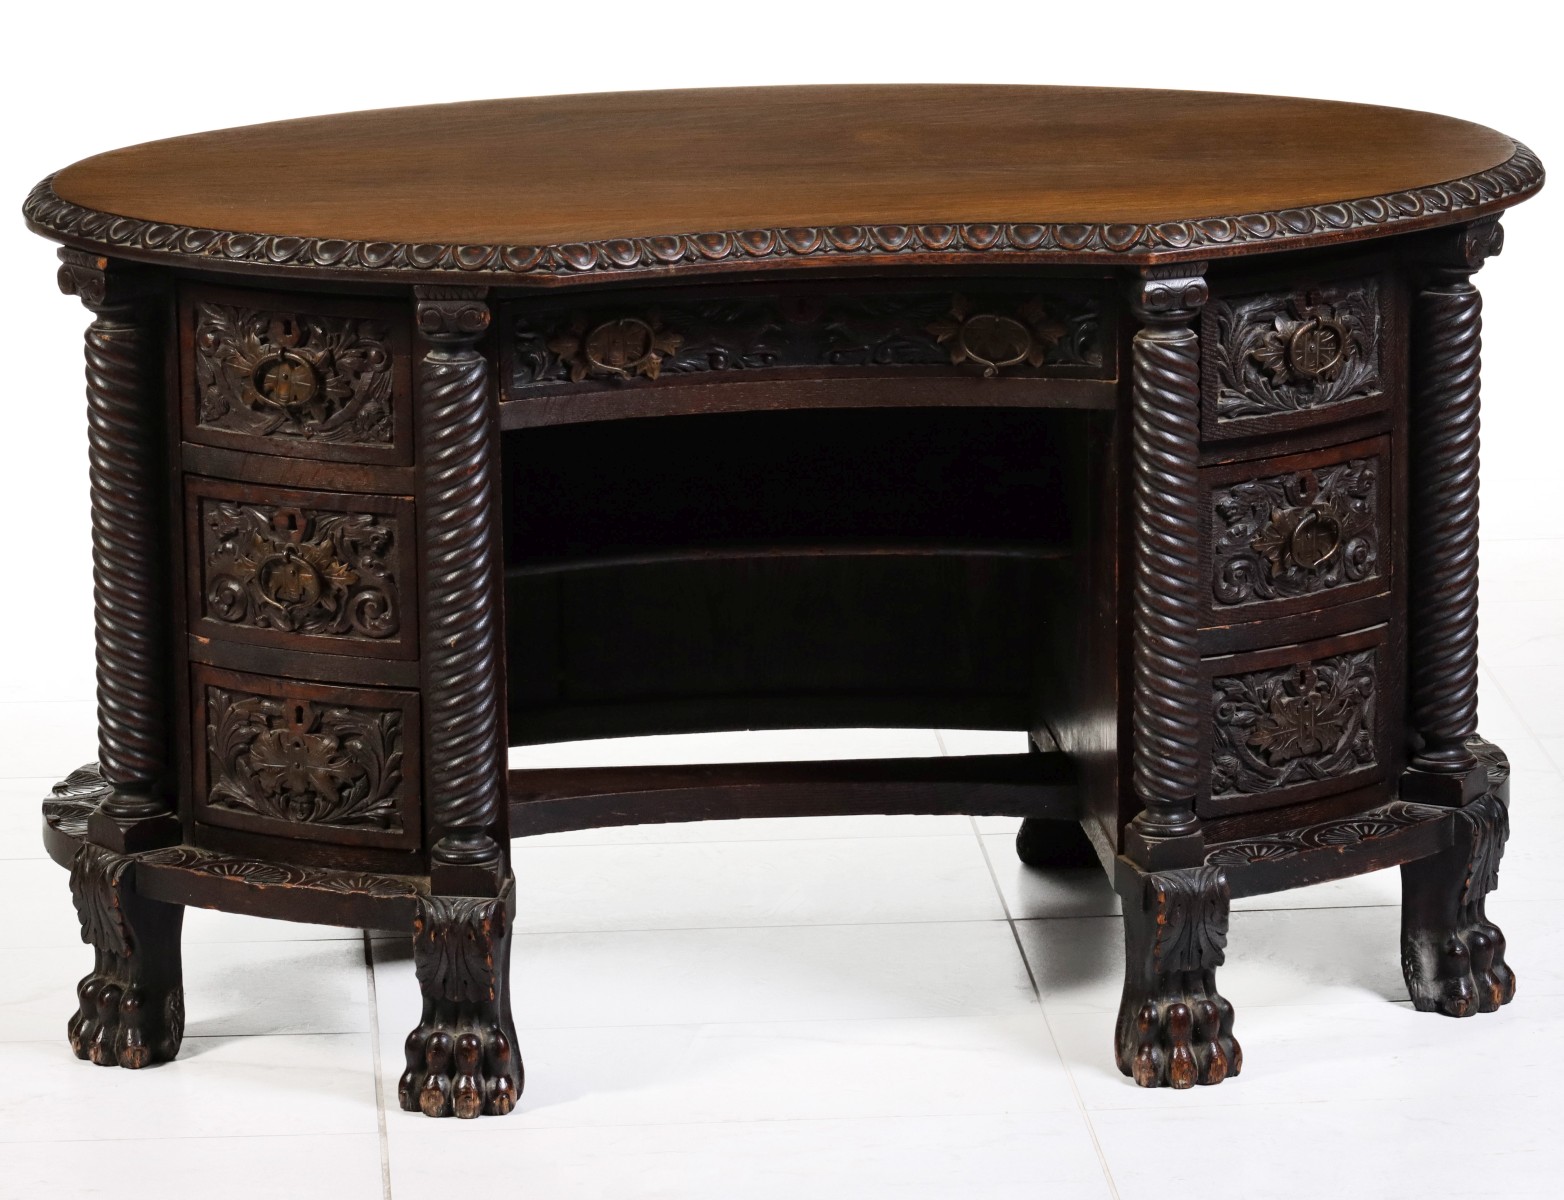 AN UNUSUAL AND HEAVILY CARVED OAK DESK CIRCA 1890